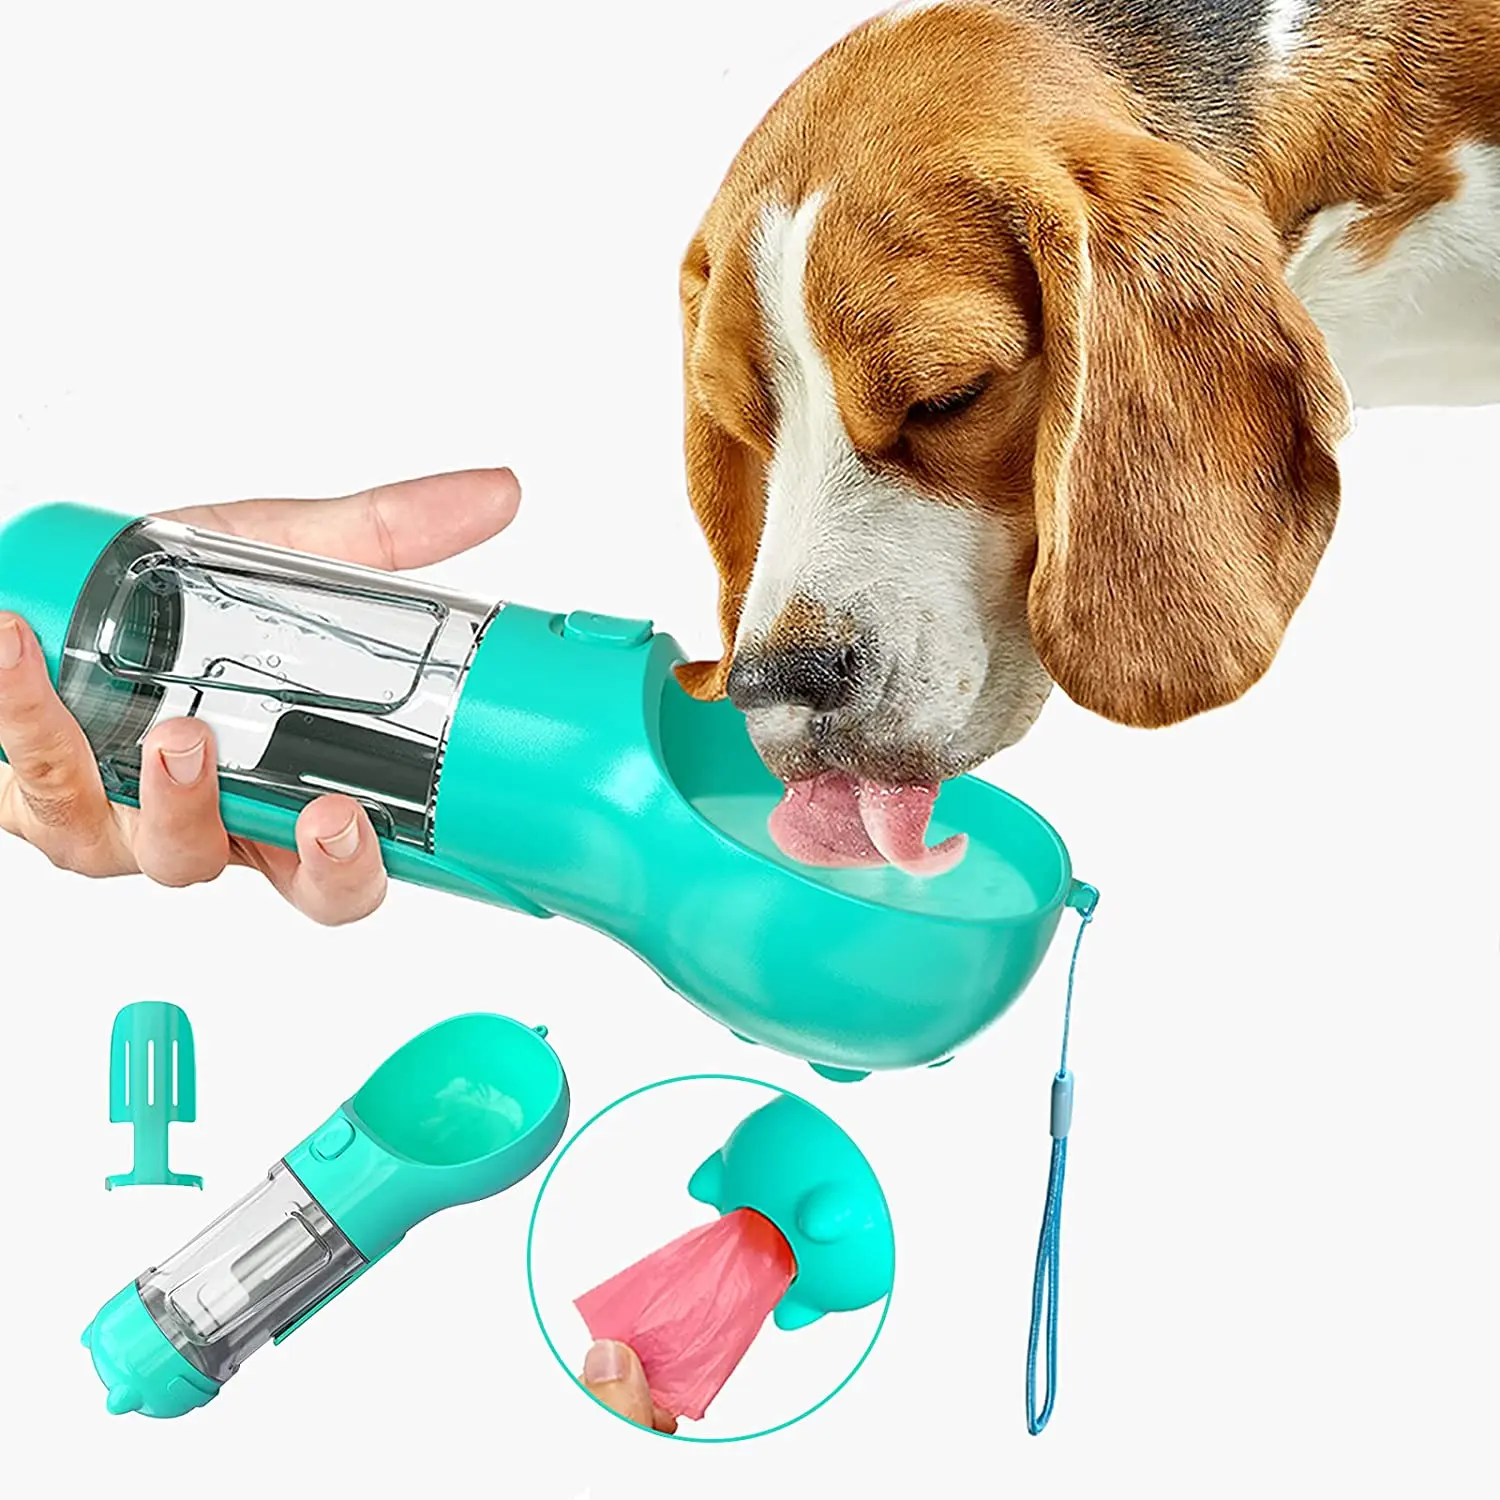 

4 in 1 Portable Outdoor Travel Pet Dog Drinking Water Bottle Bowl with 300ML Water Tank, Pink,green,blue,orange